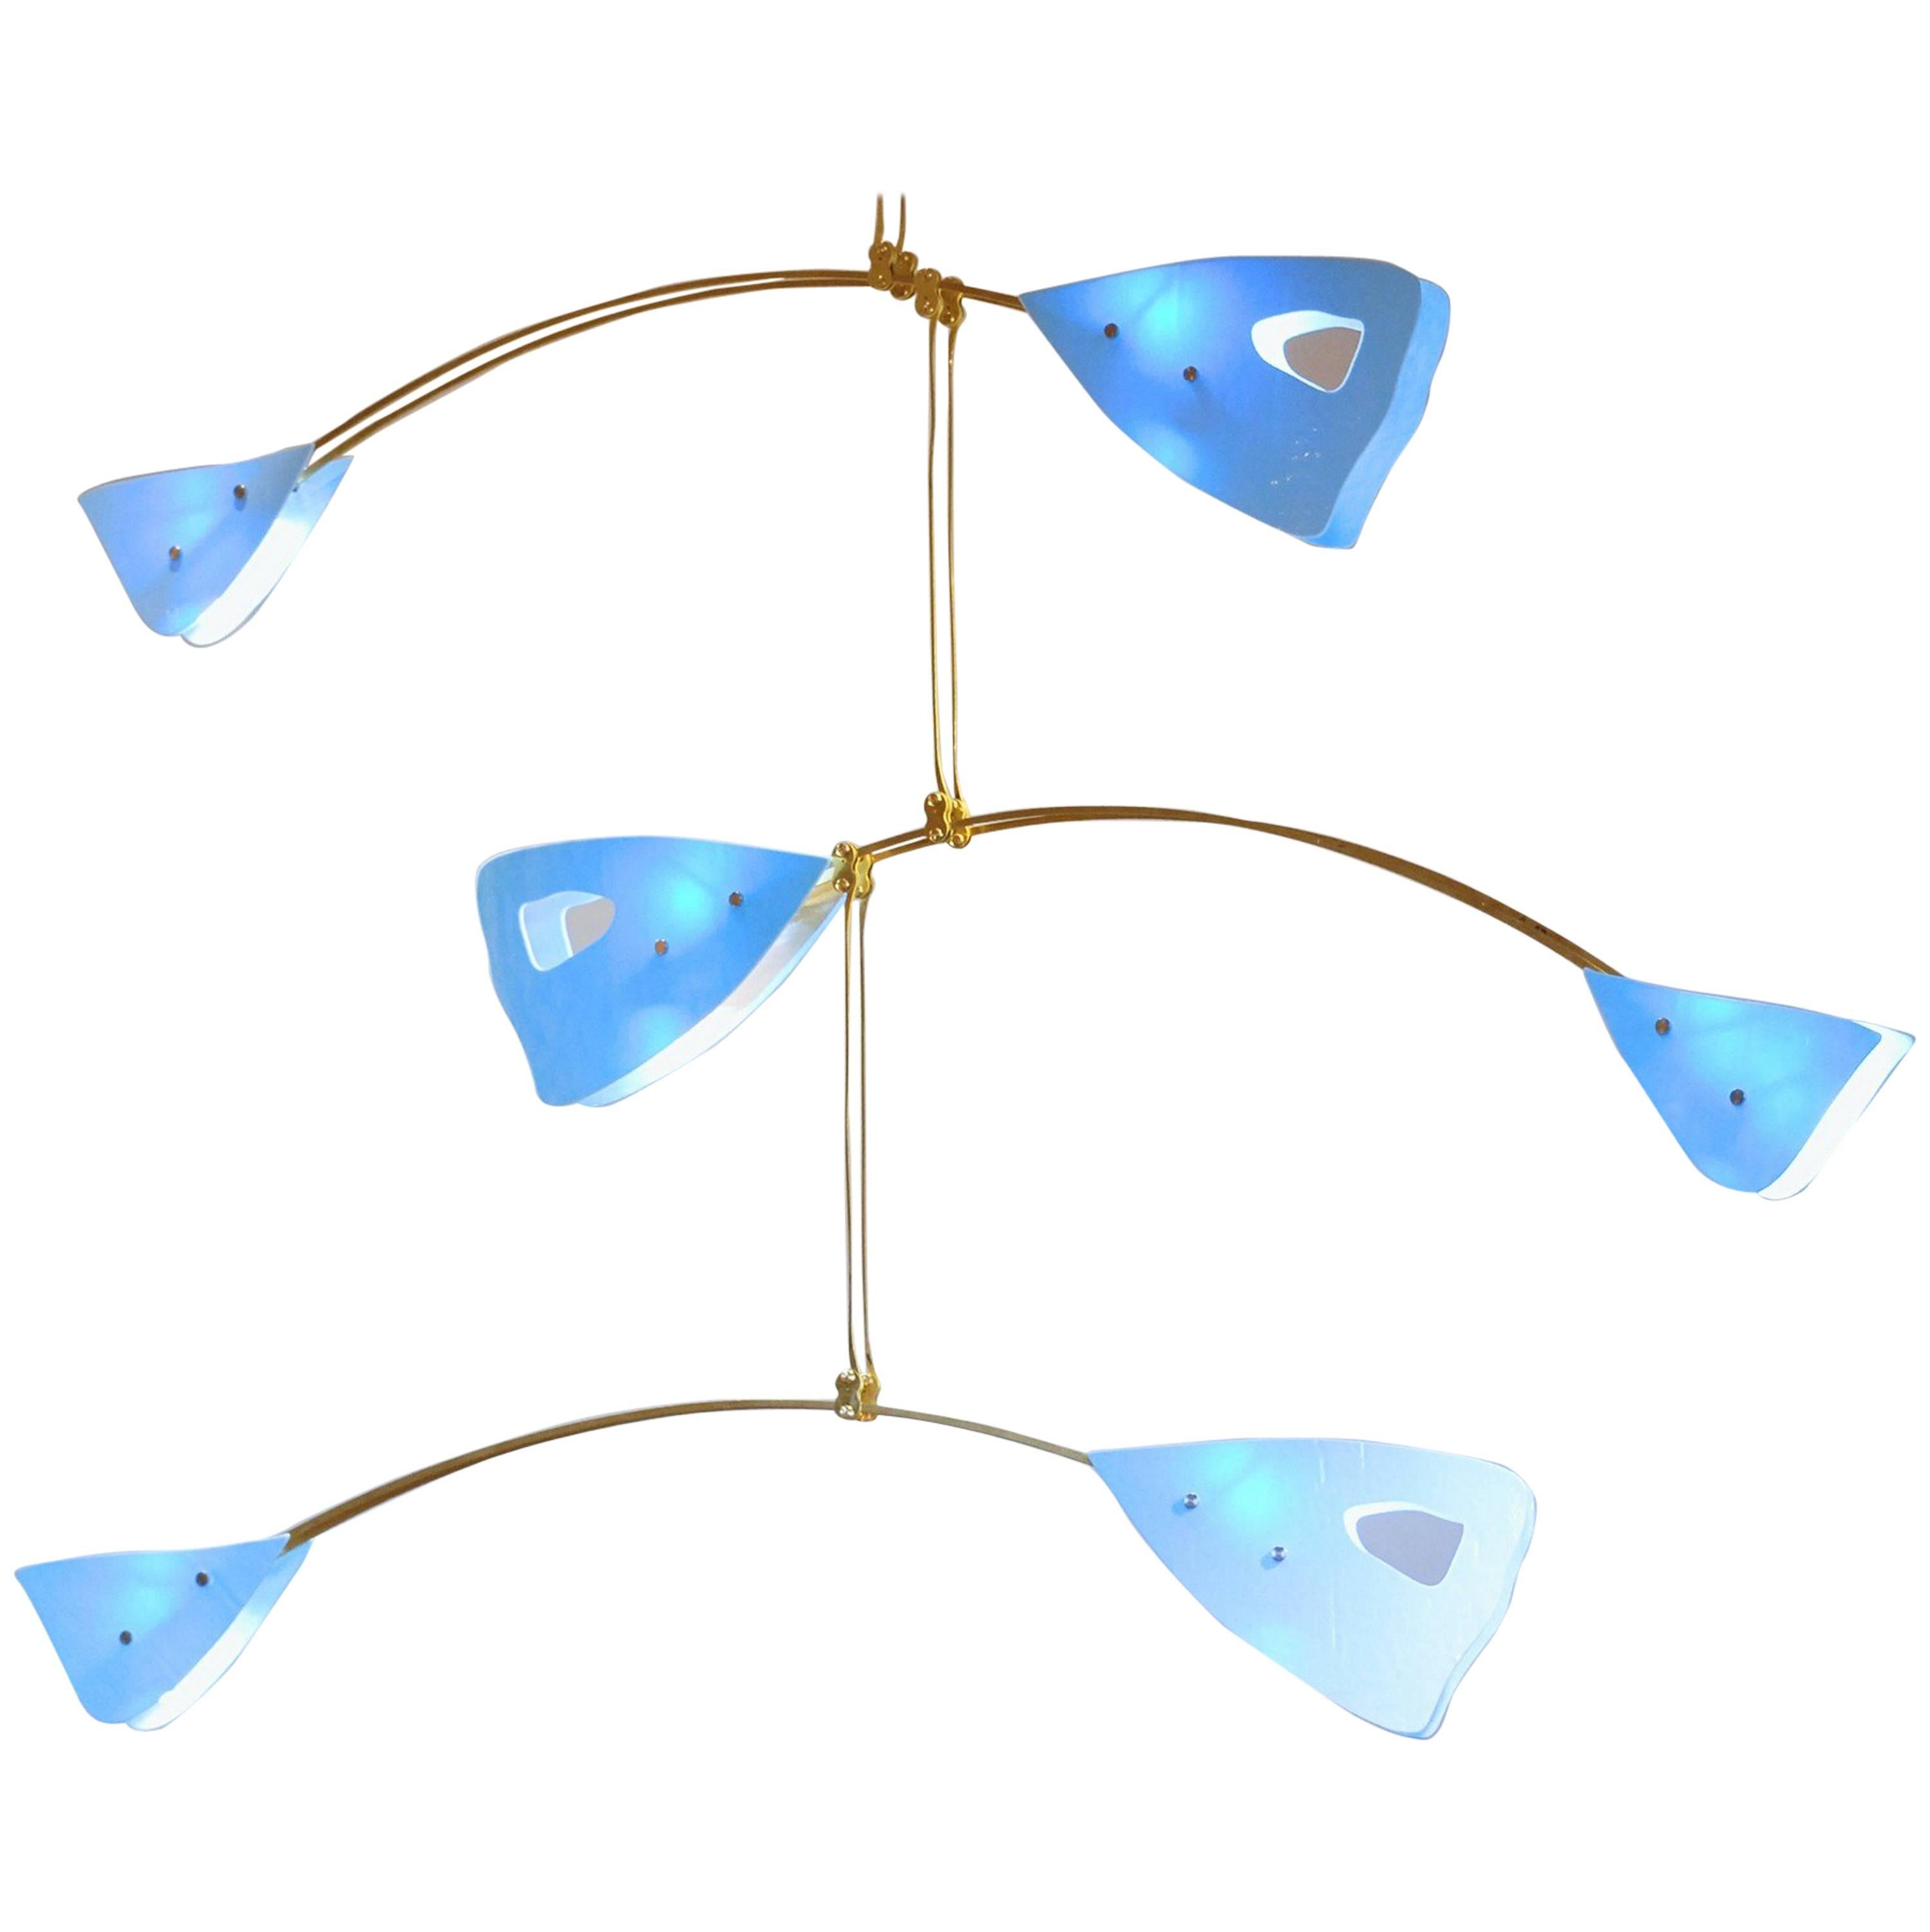 CINETICO Murano Glass and Solid Brass Mobile Chandelier Sky Blue Glass Elements